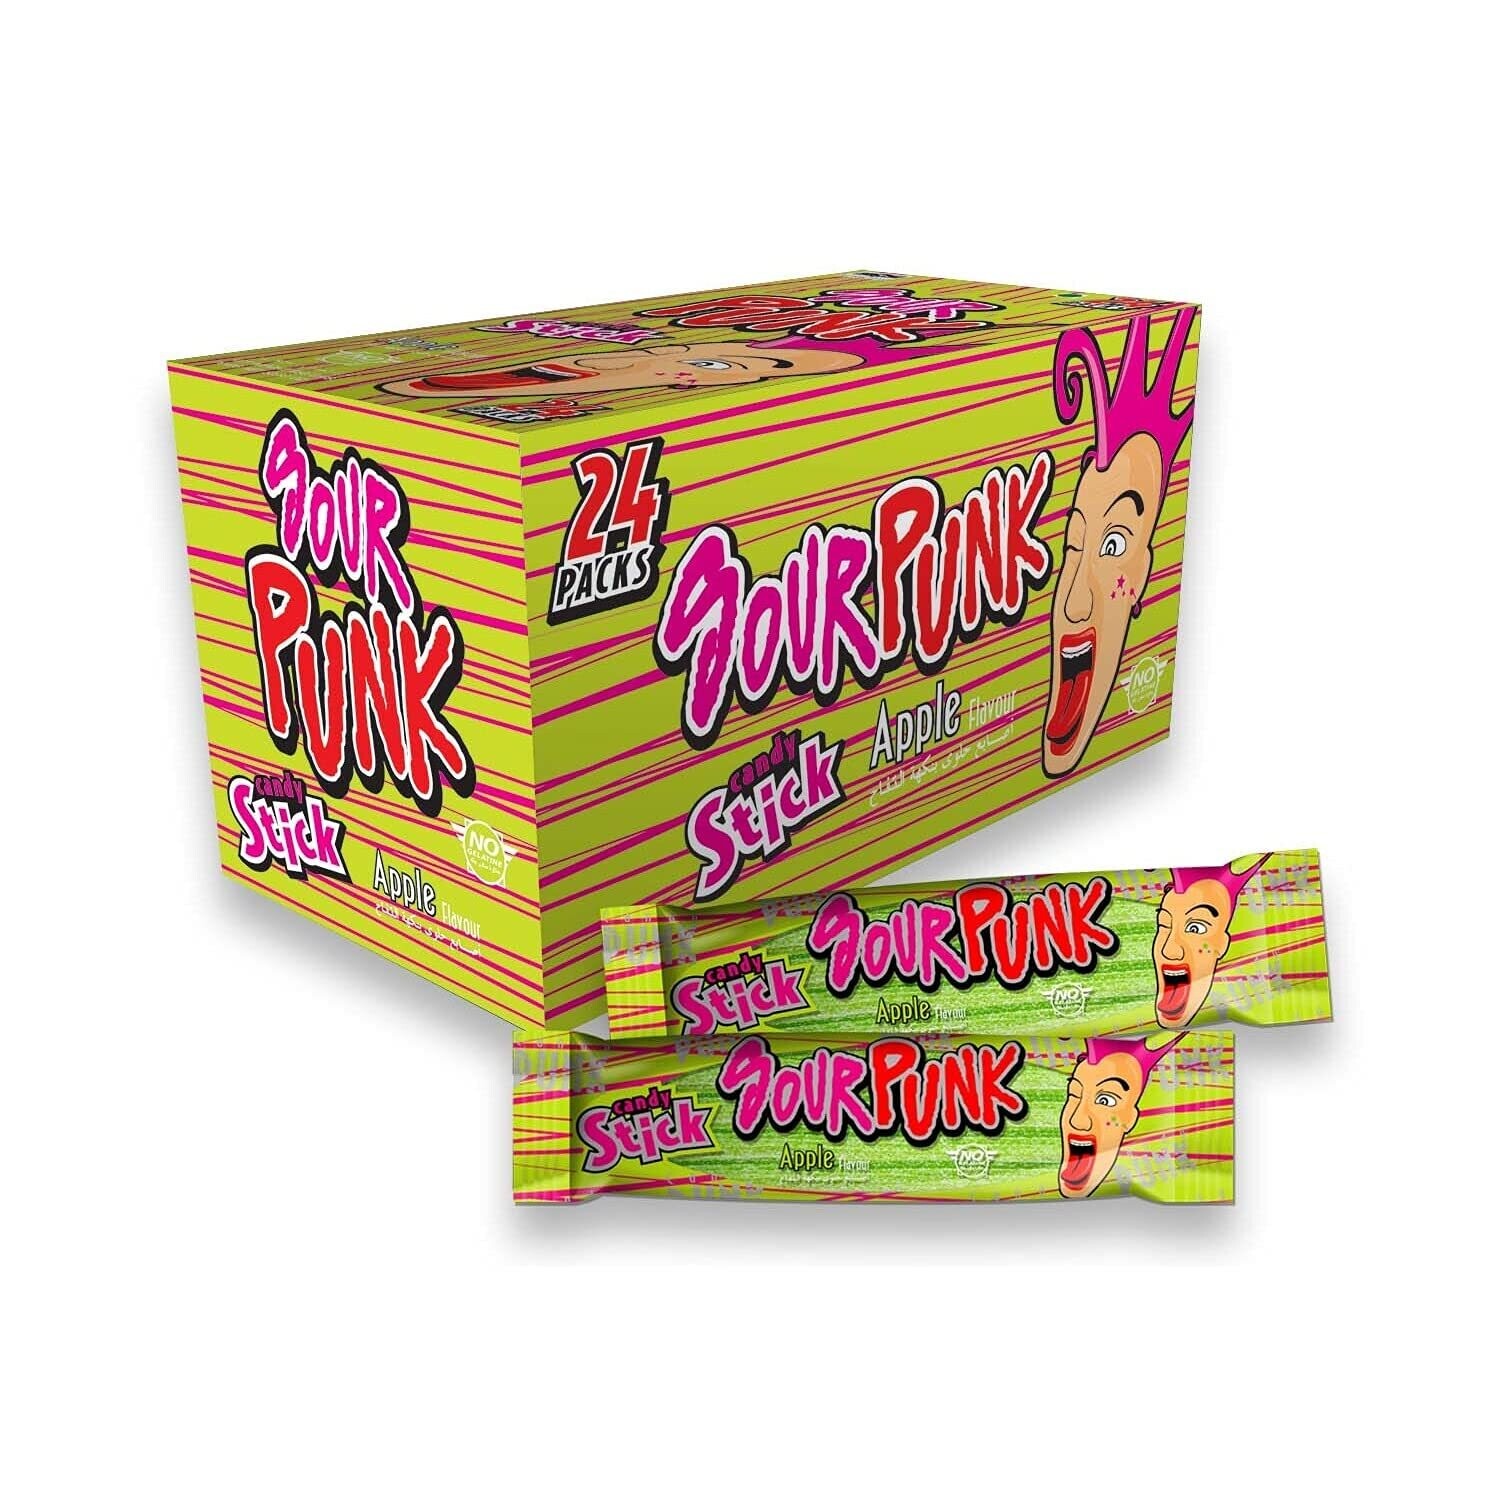 Sour Punk Candy Sticks in Apple Flavor - Pack of 24 ( 40g each), Sweet & Sour Chewy Apple Candy || Party Treats Pack || Share with Friends and Family